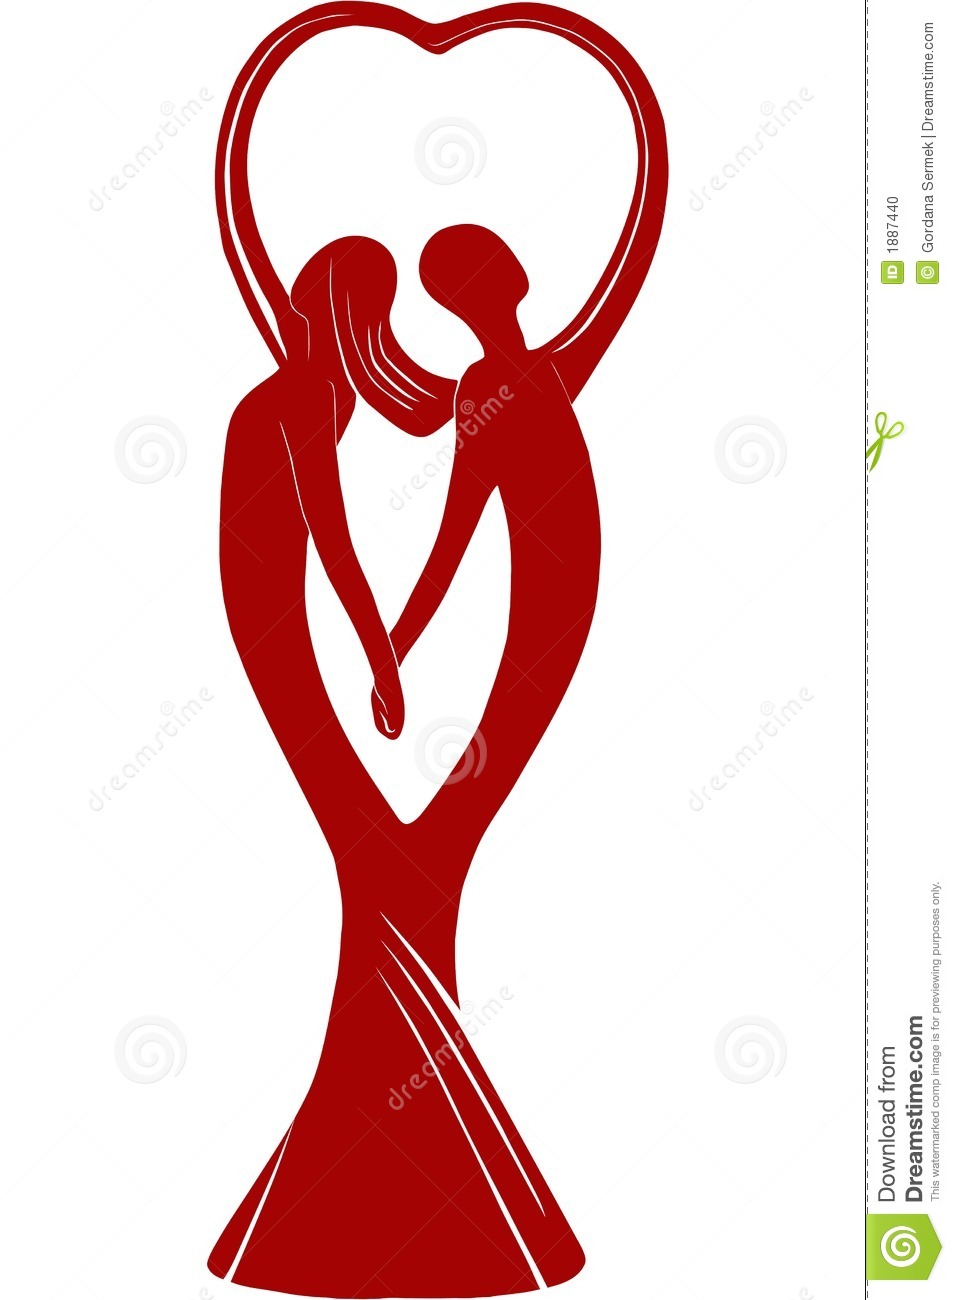 Couple In Love Holding Hands In The Shape Of Heart   Illustration